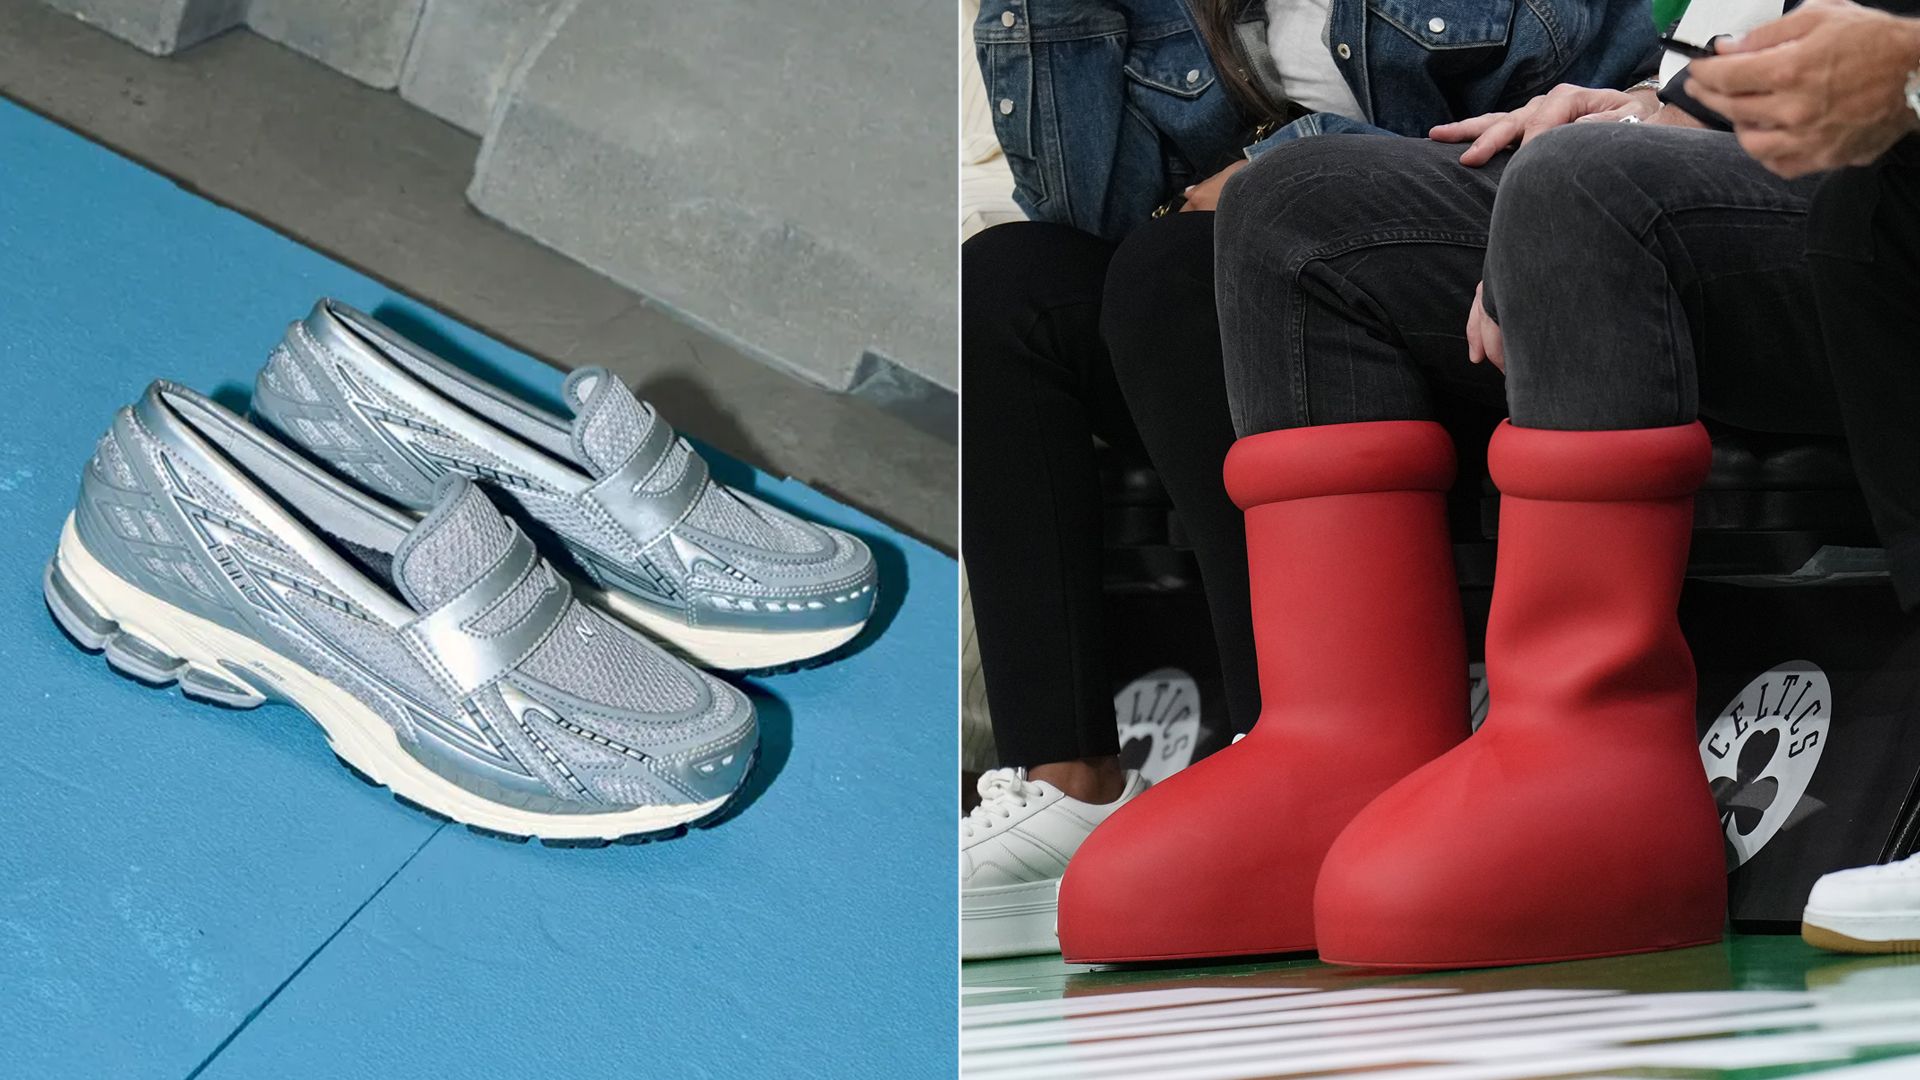 Side-by-side photos of New Balance "snoafers" and the biggest red boots you have ever seen in your life